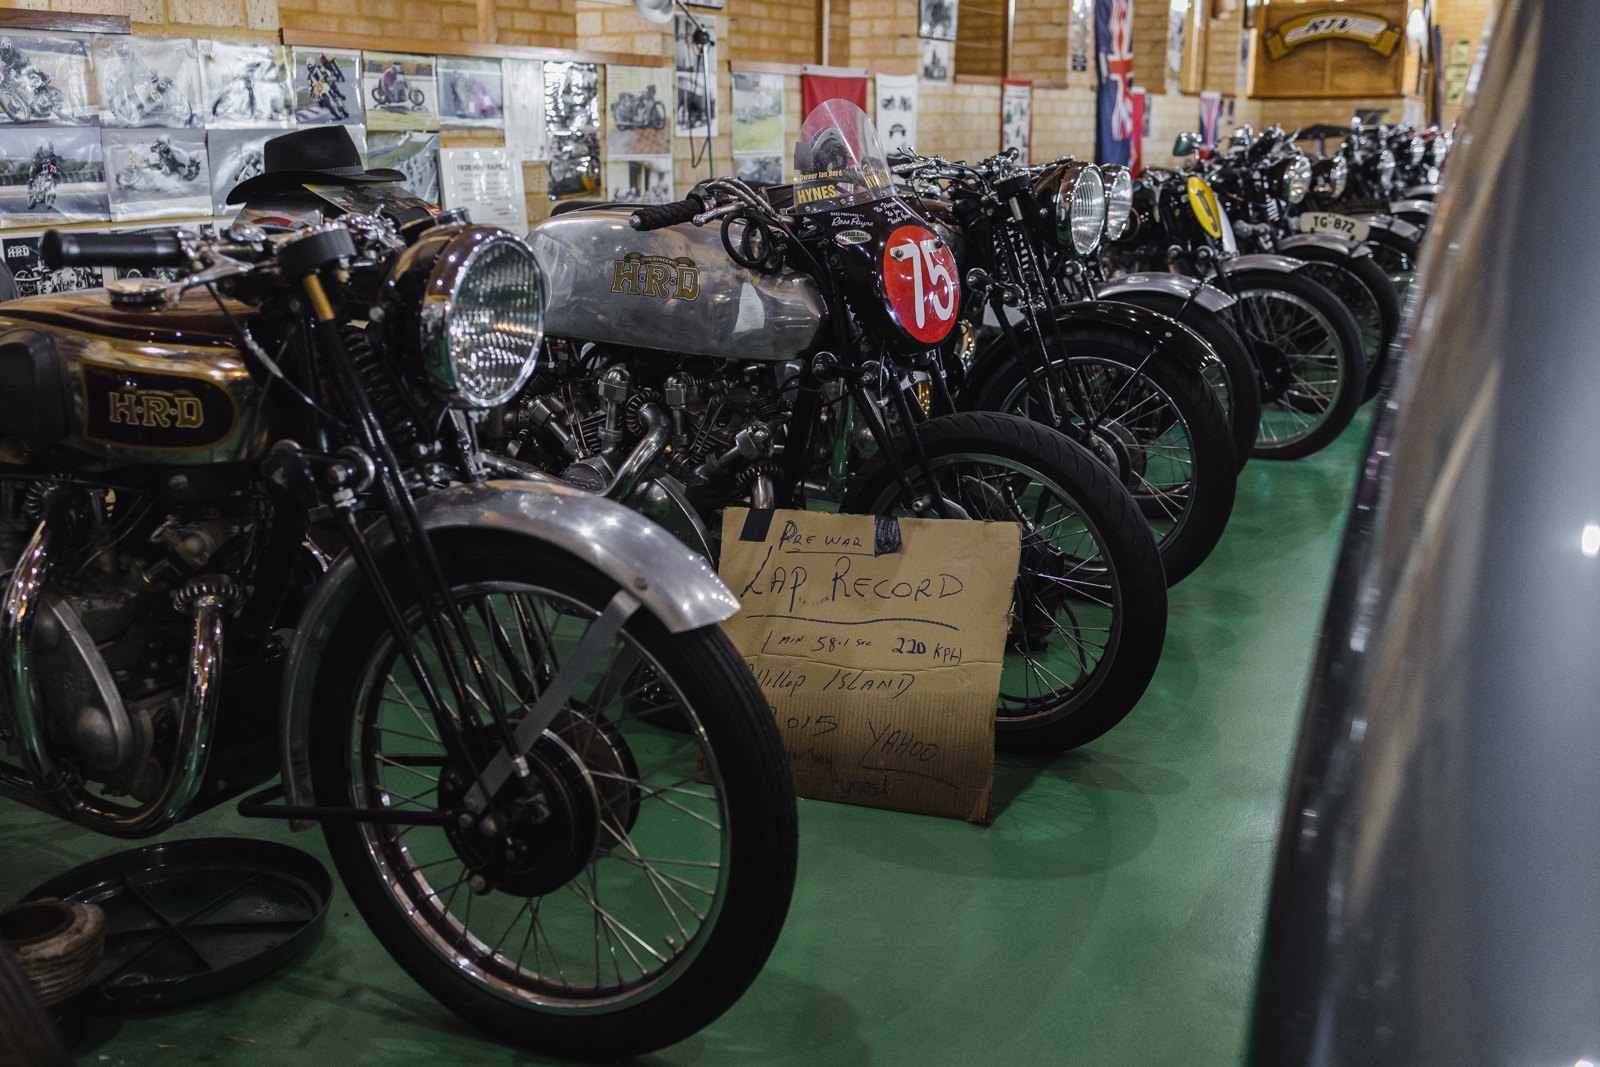 Collection of vintage Vincent HRD motorcycles